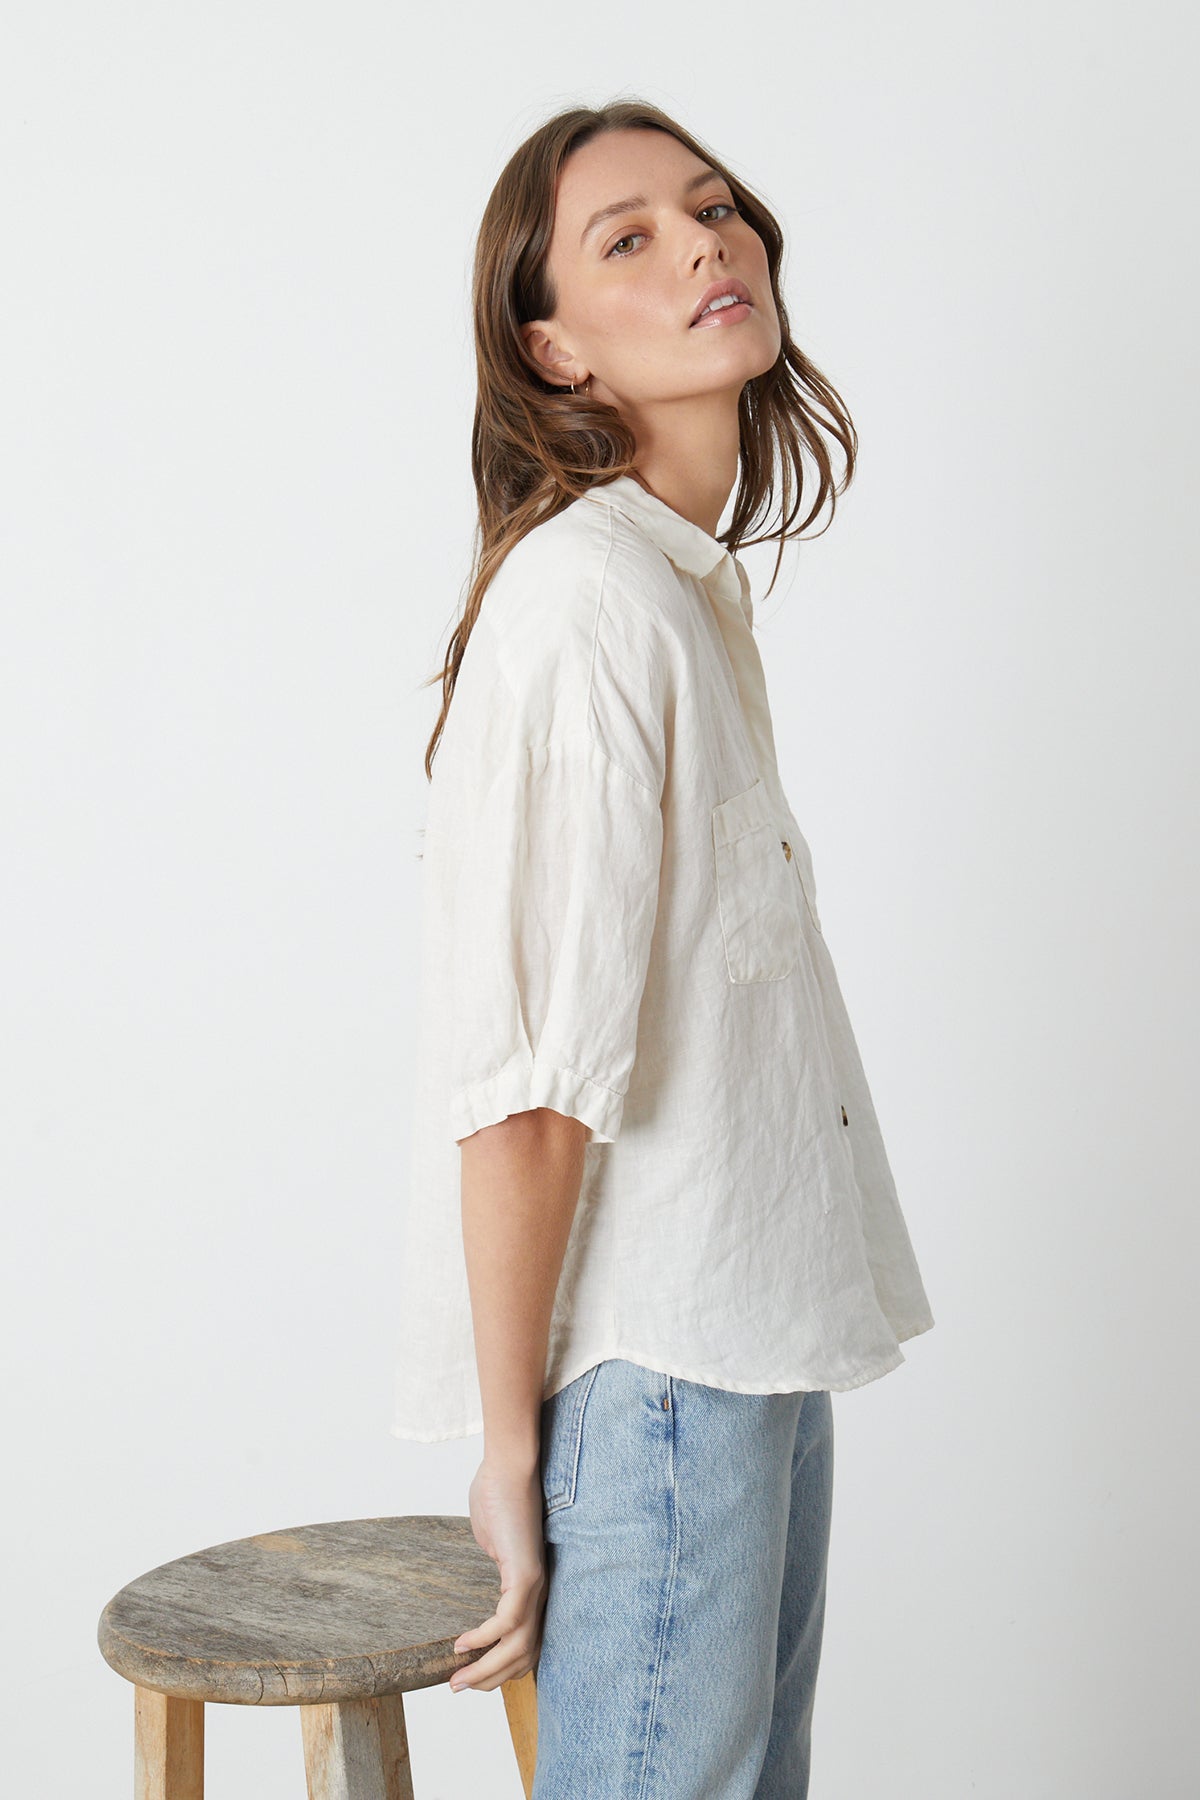   The model is wearing a white MARIA LINEN BUTTON-UP SHIRT by Velvet by Graham & Spencer and jeans. 